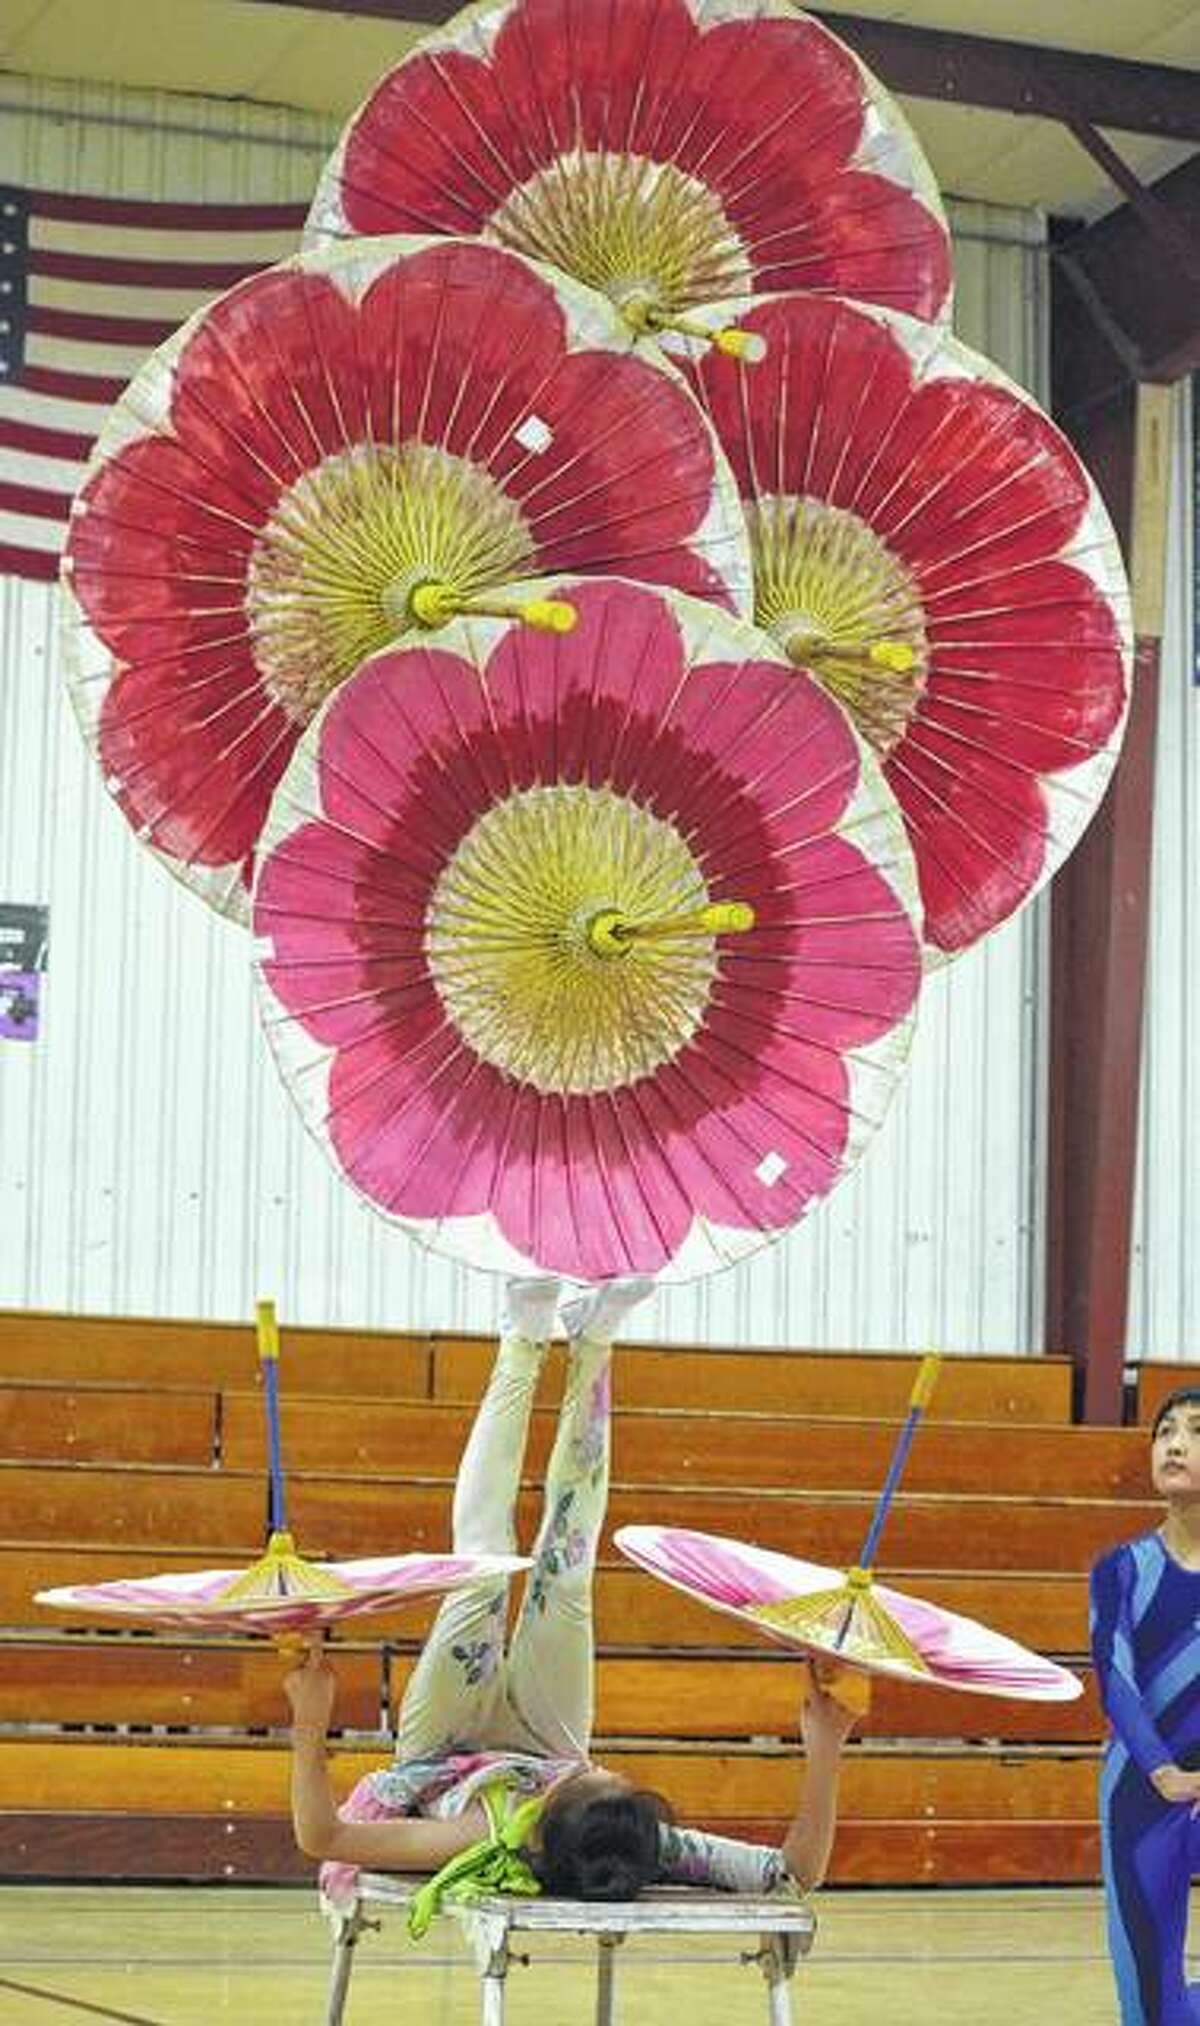 Wang Ling Yue (Ava), 12, a performer with the Fabulous Chinese Acrobats, does a balancing act using Chinese umbrellas Tuesday at North Greene Elementary School.